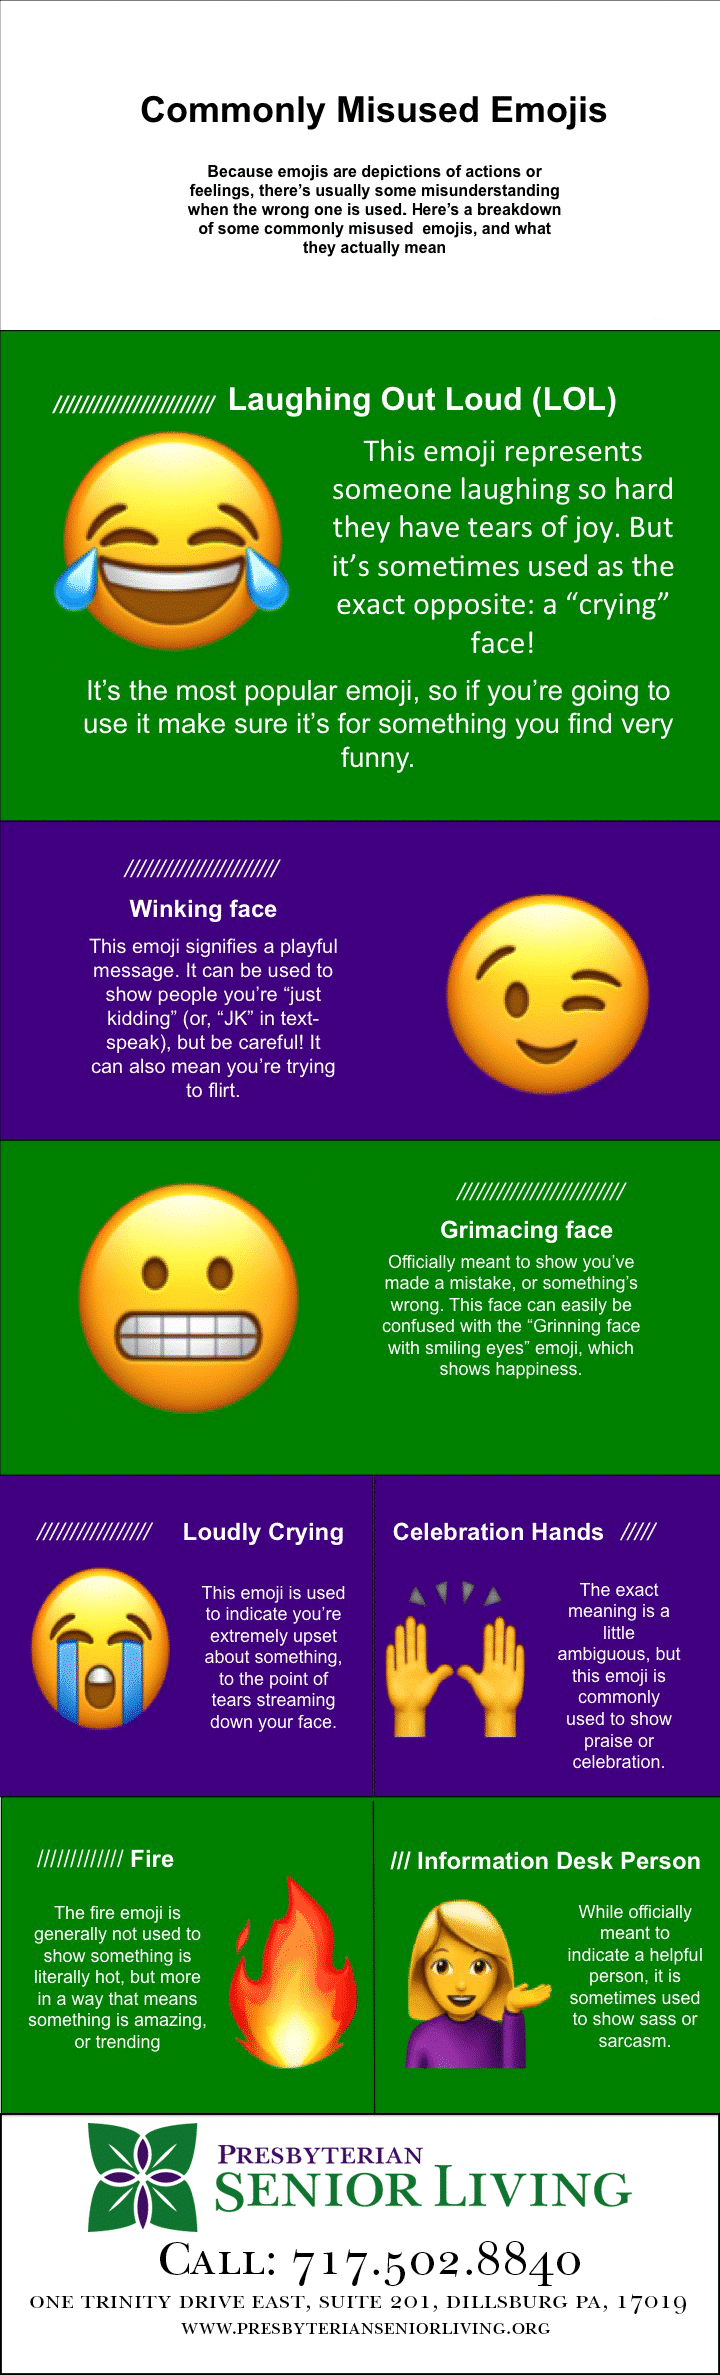 Misused emoji infographic final5.png